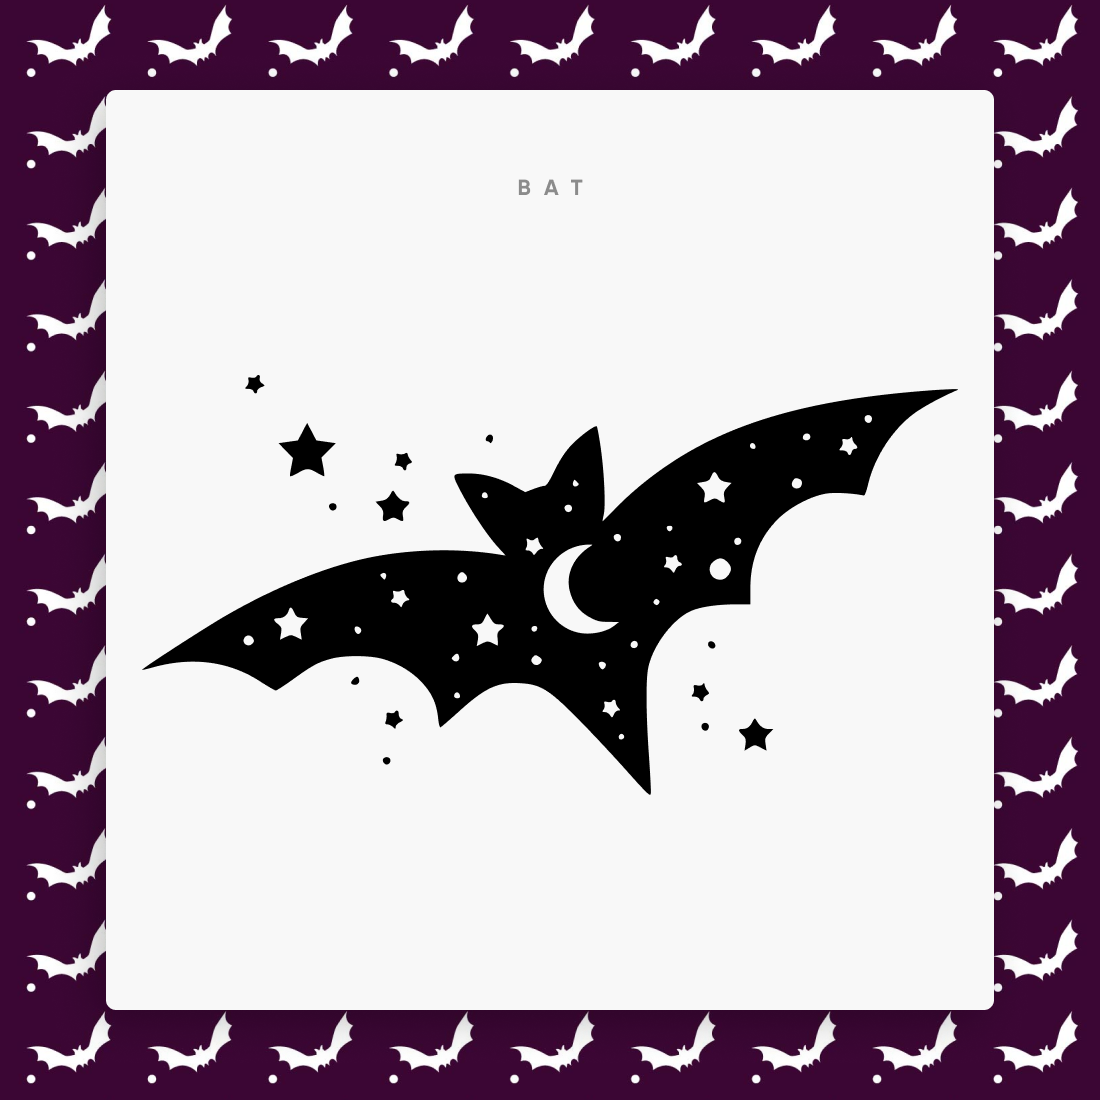 Bat flying through the air with stars around it.